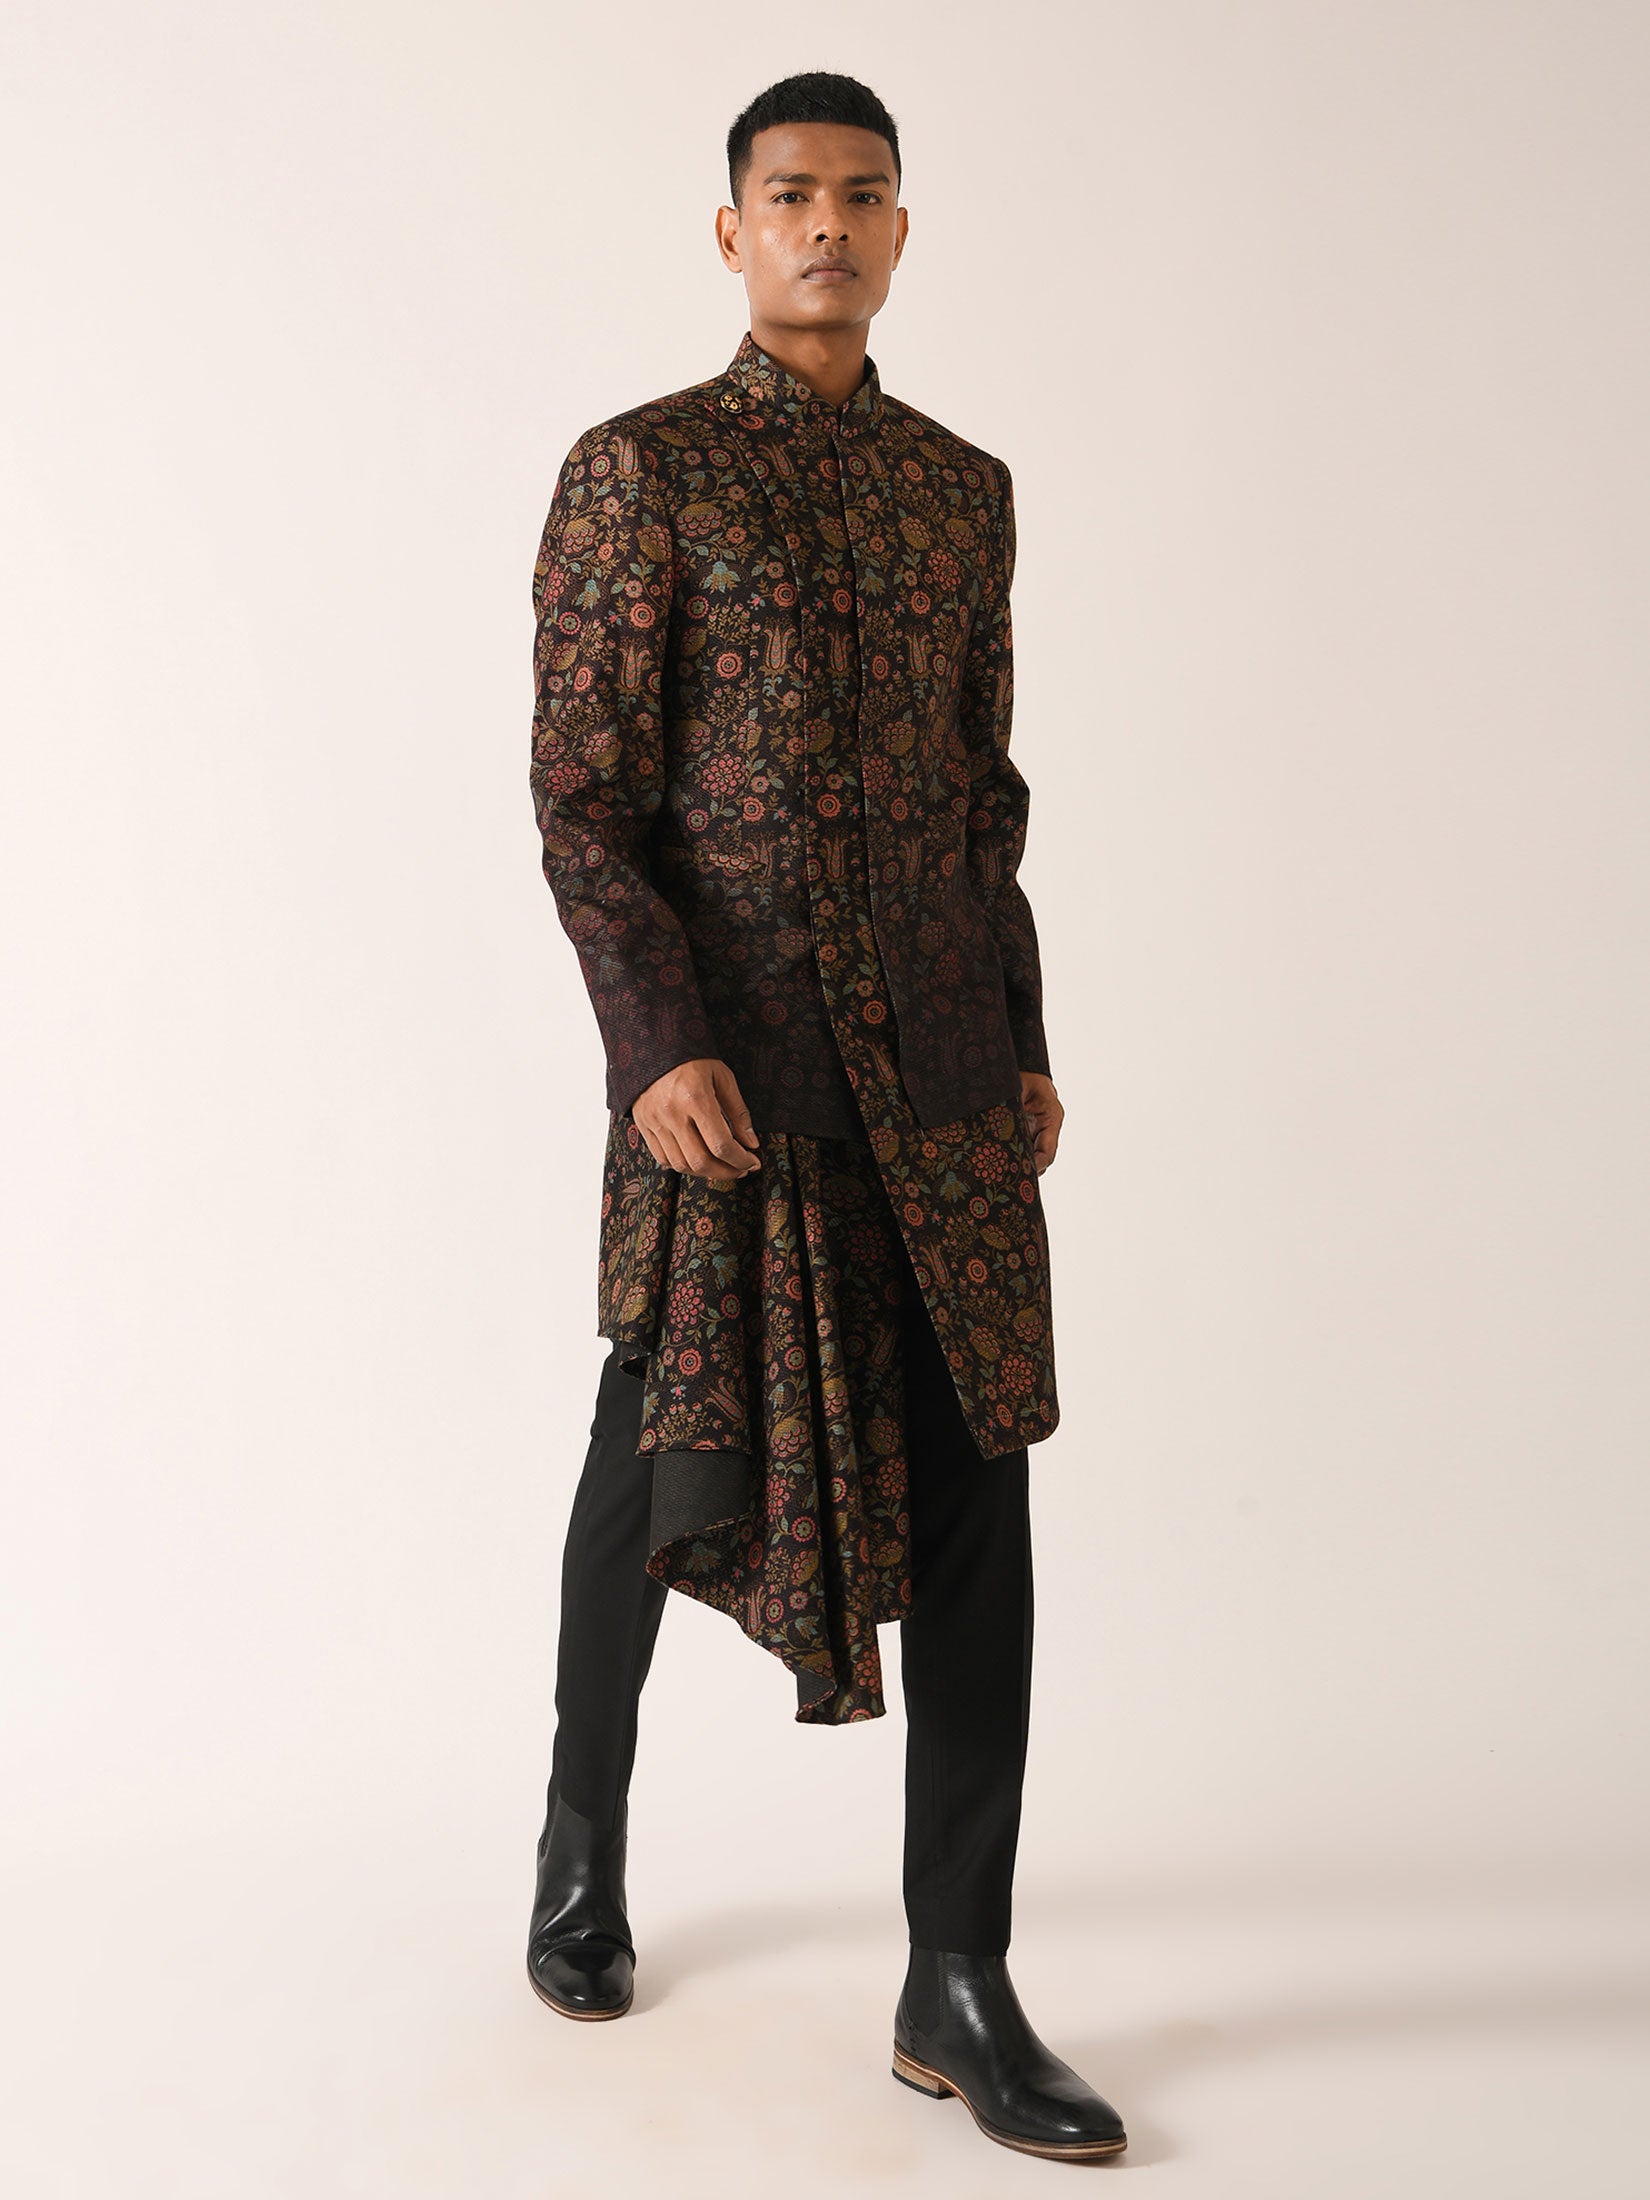 Silk Wedding Wear Sherwani Suit D.No.14091, Pattern: Embroidery, Size: 42  at Rs 10495/piece in Surat